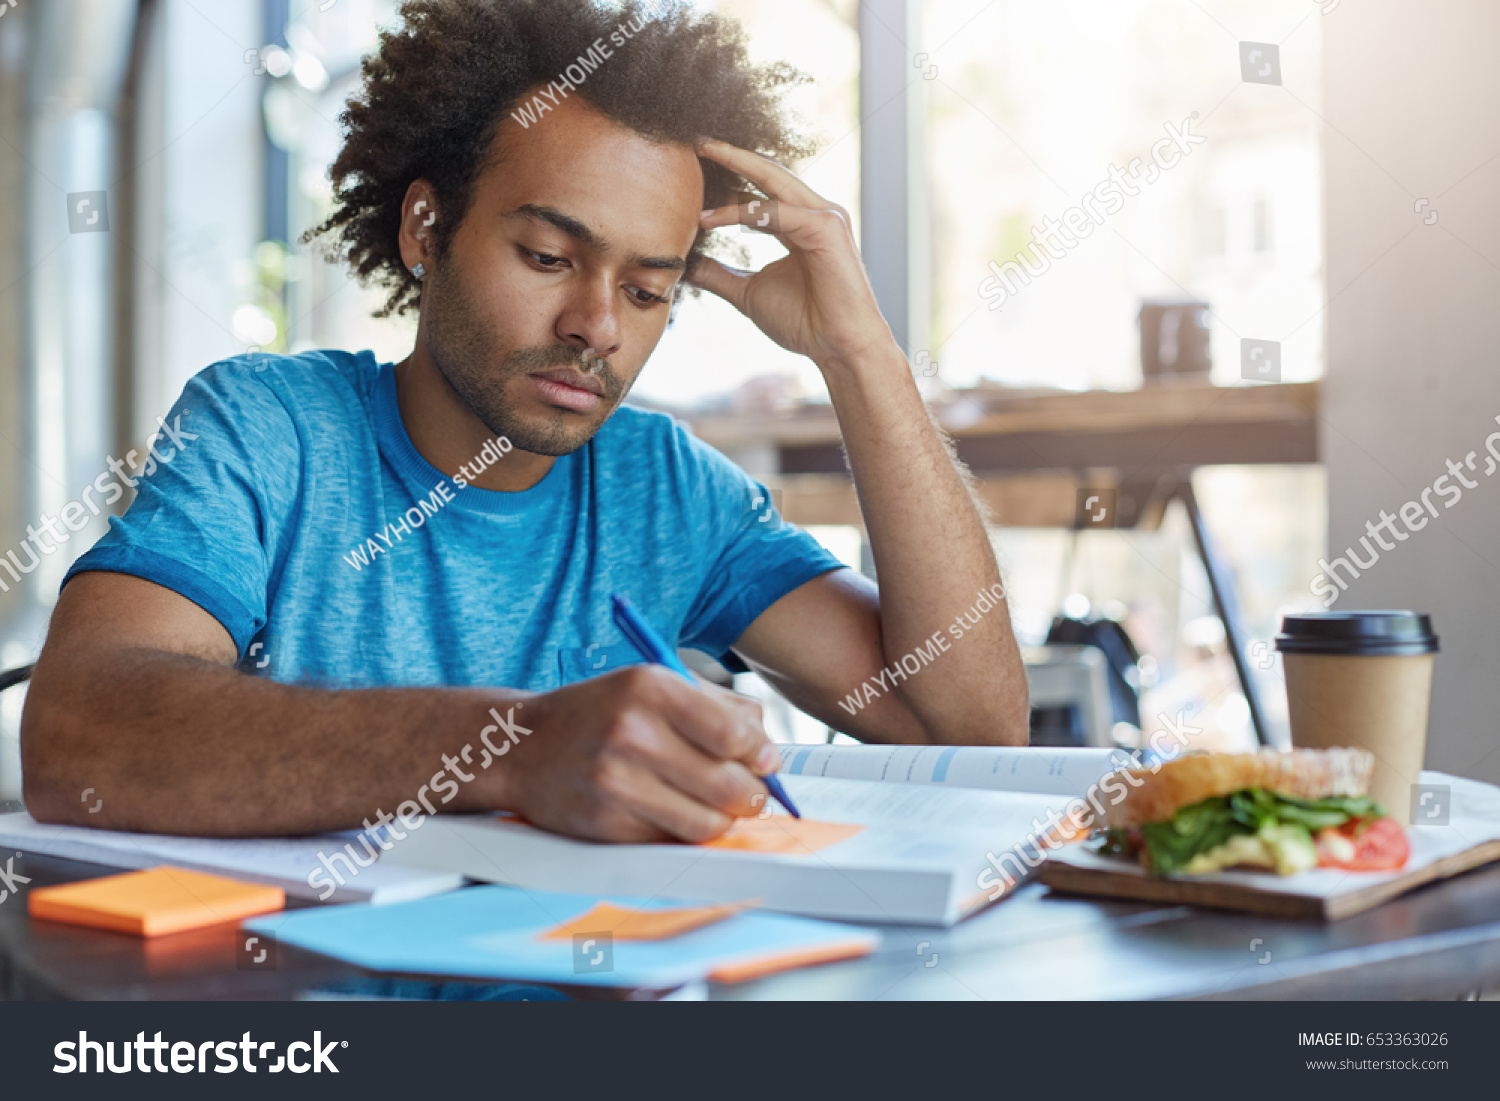 Handsome serious black European male student busy learning lessons during lunch at cafe, sitting at table with food and textbooks, making notes, writing down new words preparing for Spanish class #653363026